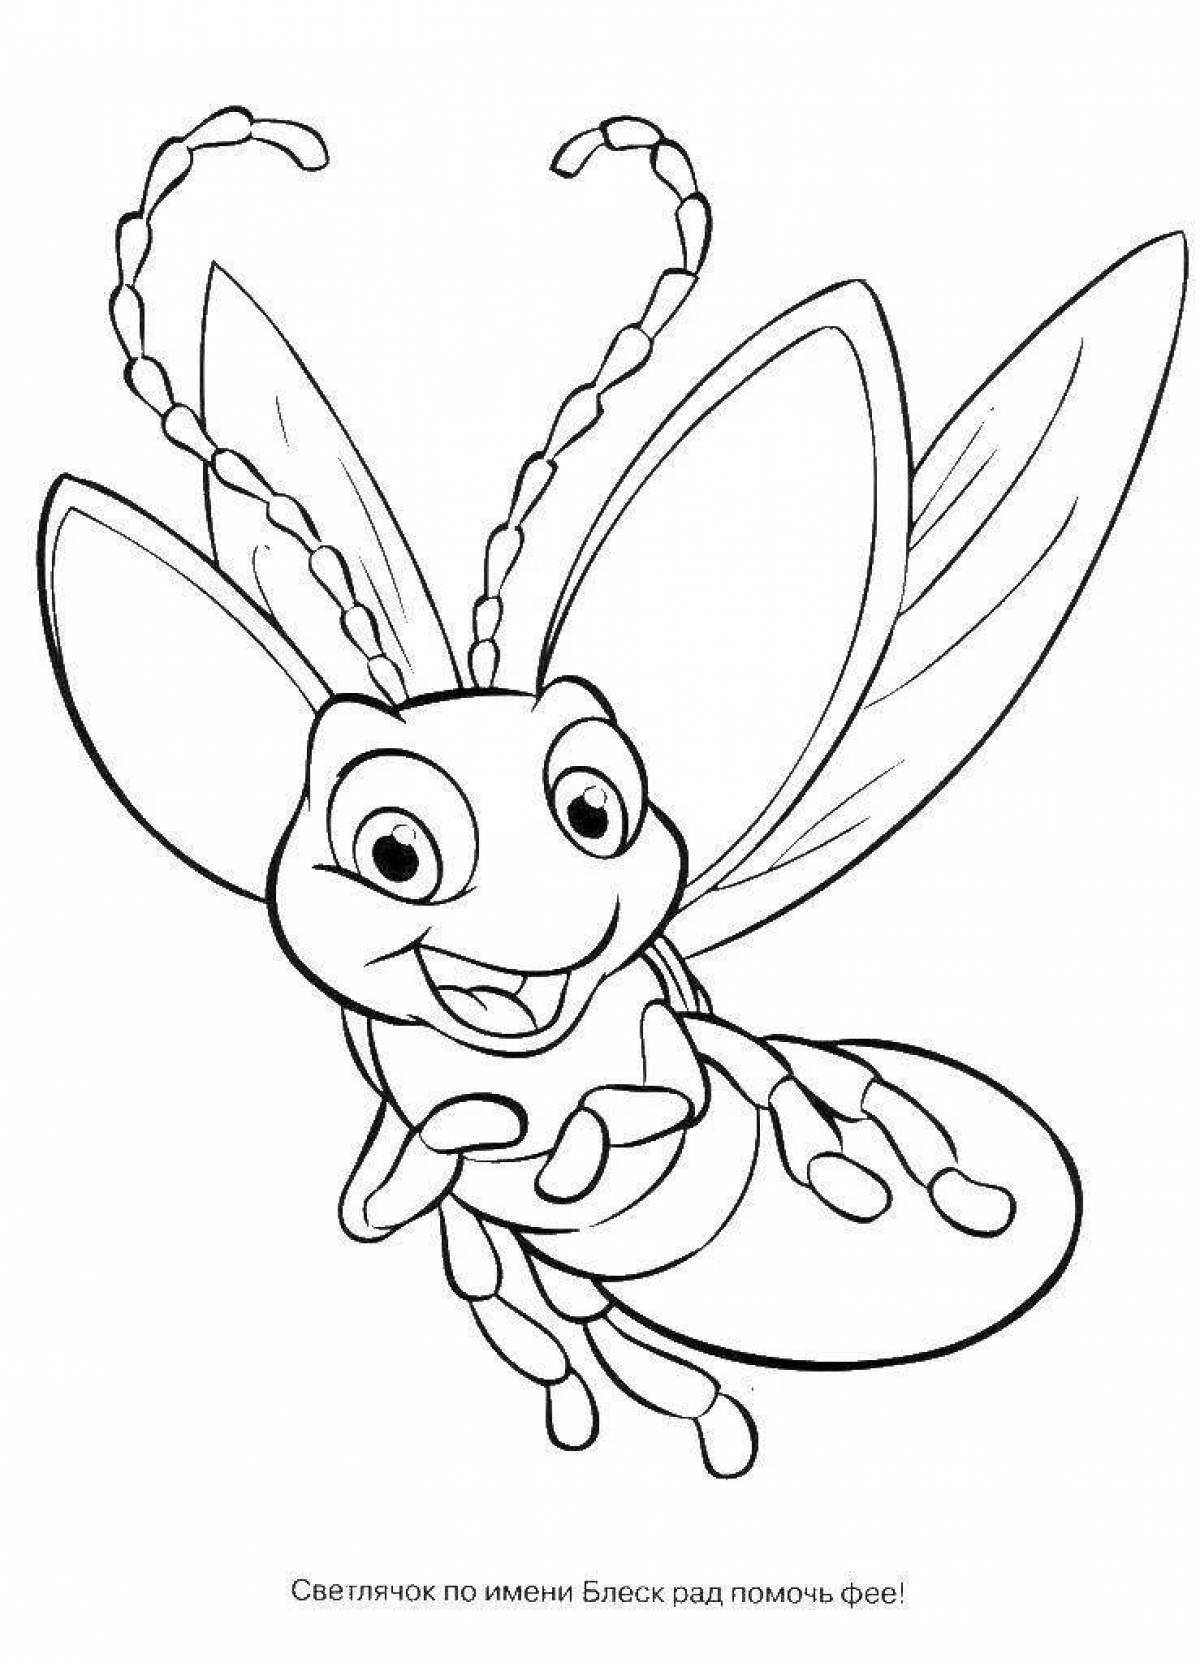 Fairy firefly coloring page